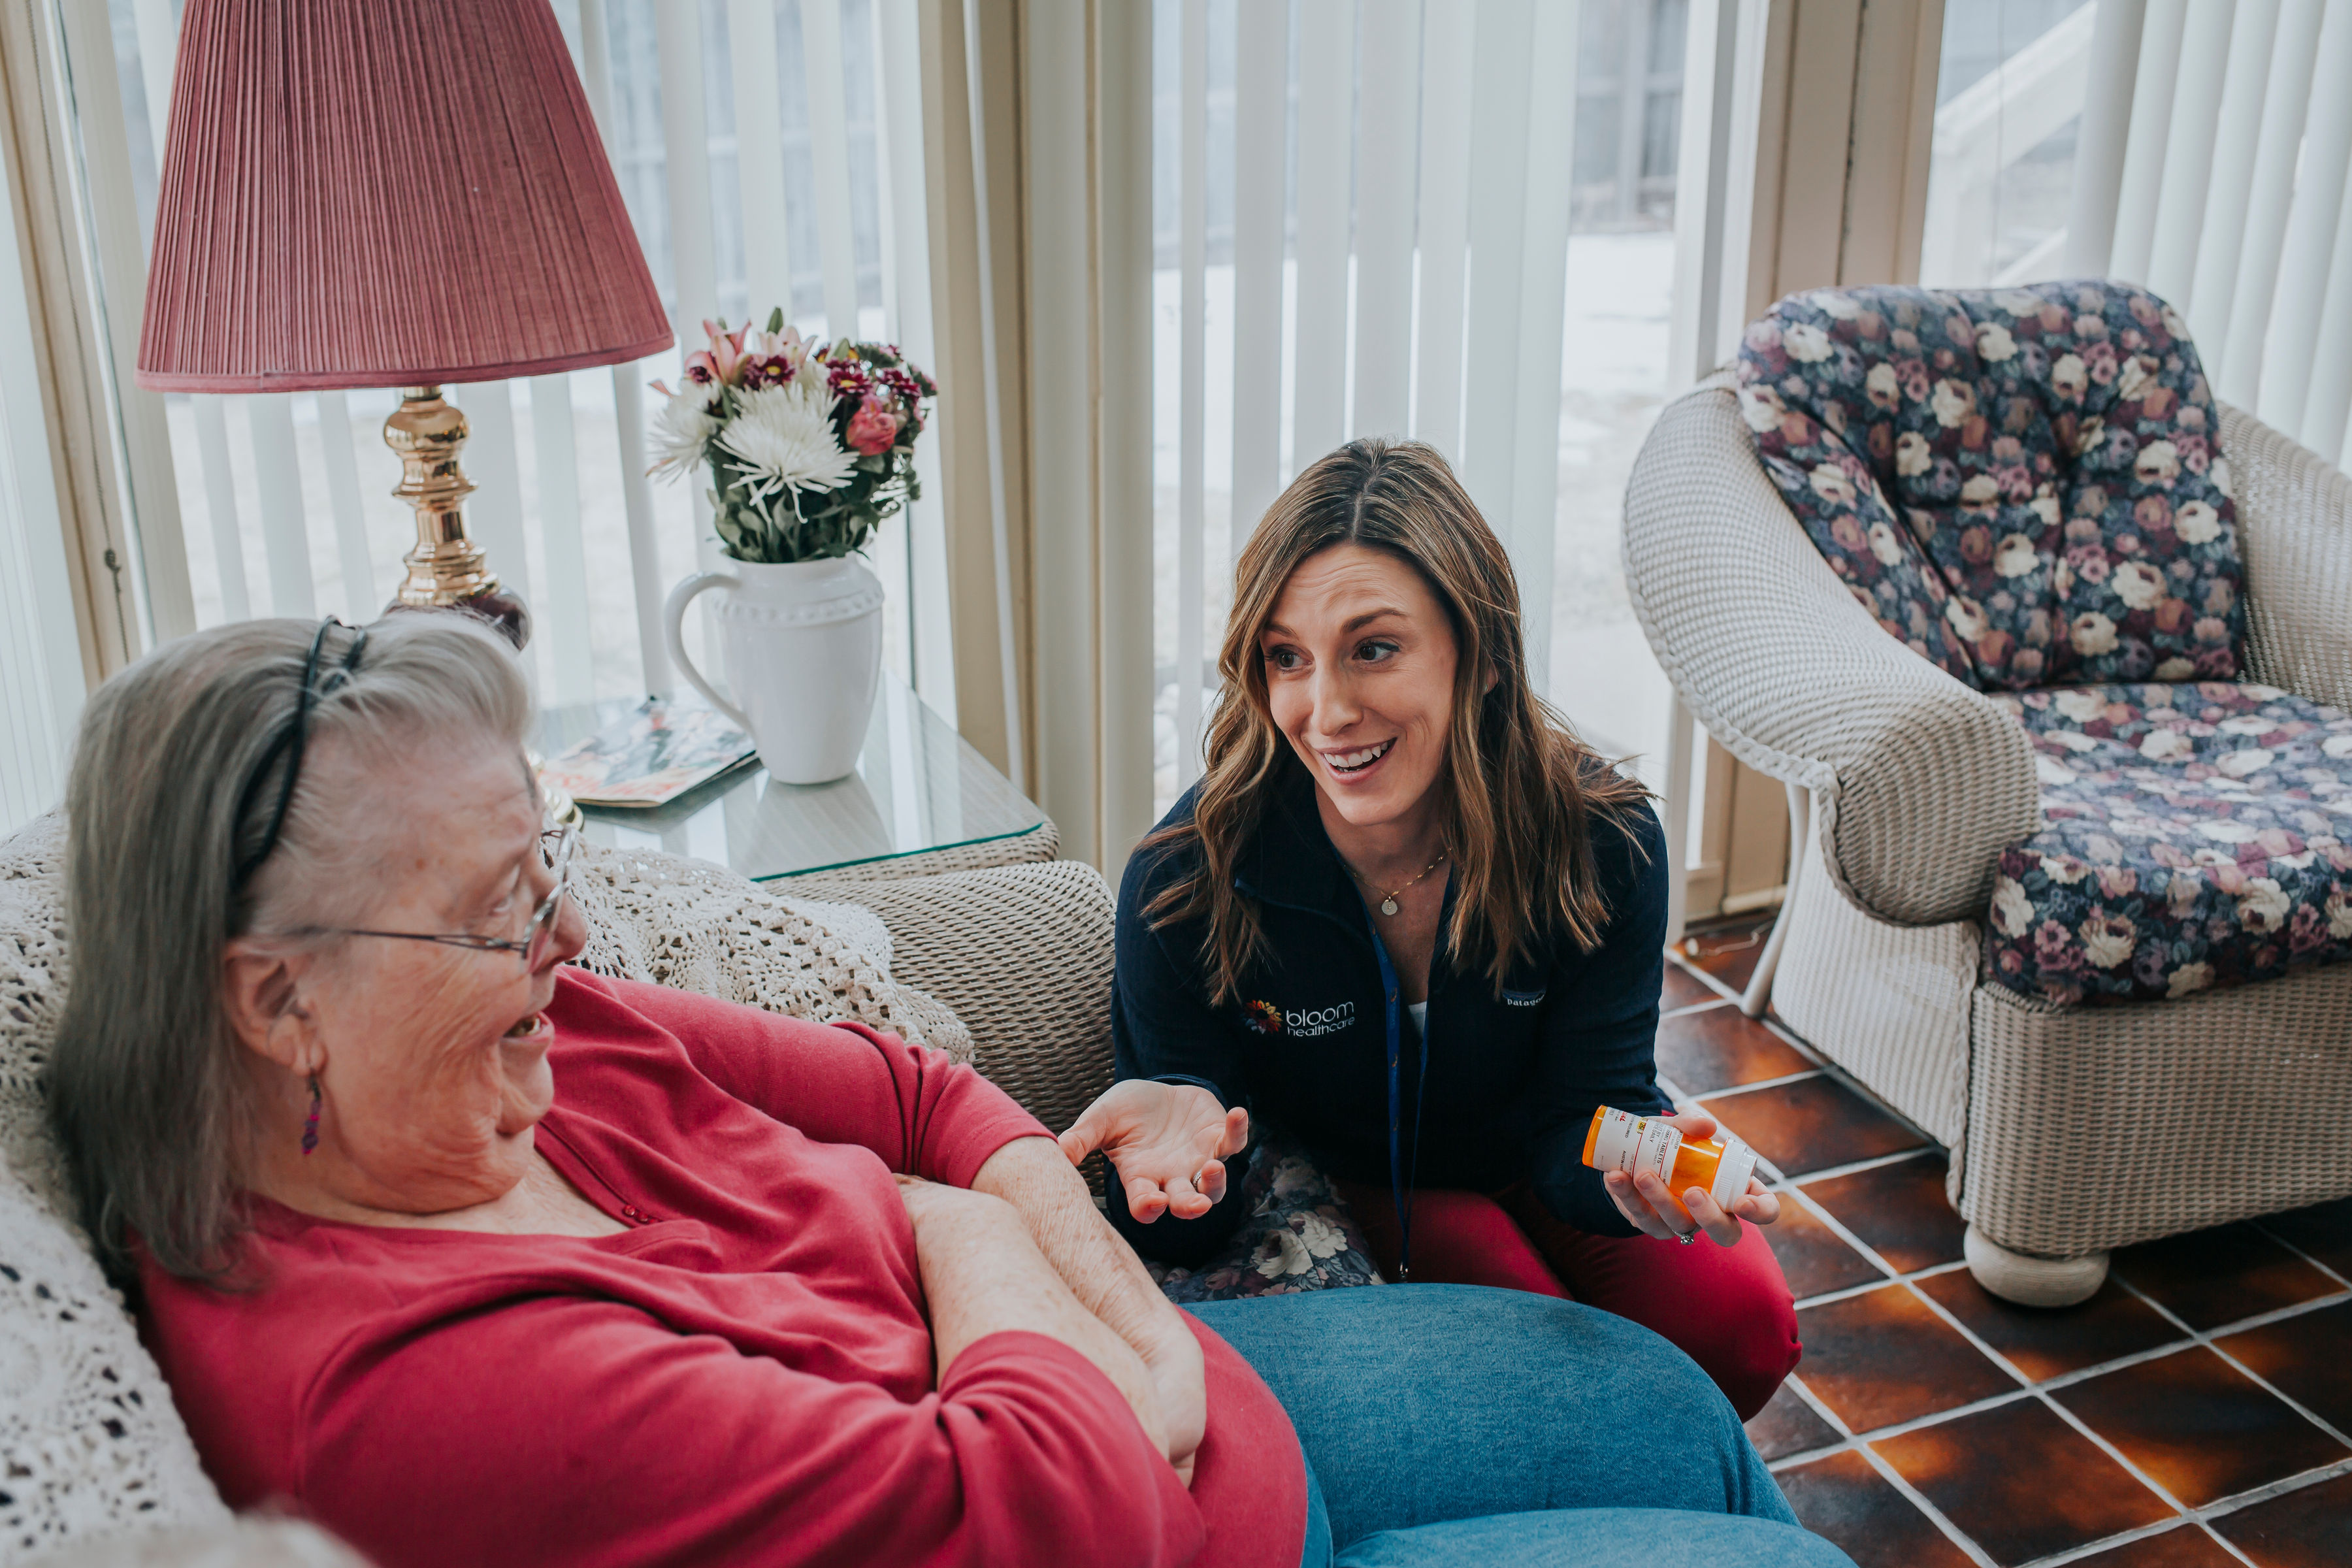 An image of a Bloom Healthcare caregiver discussing options with a smiling patient